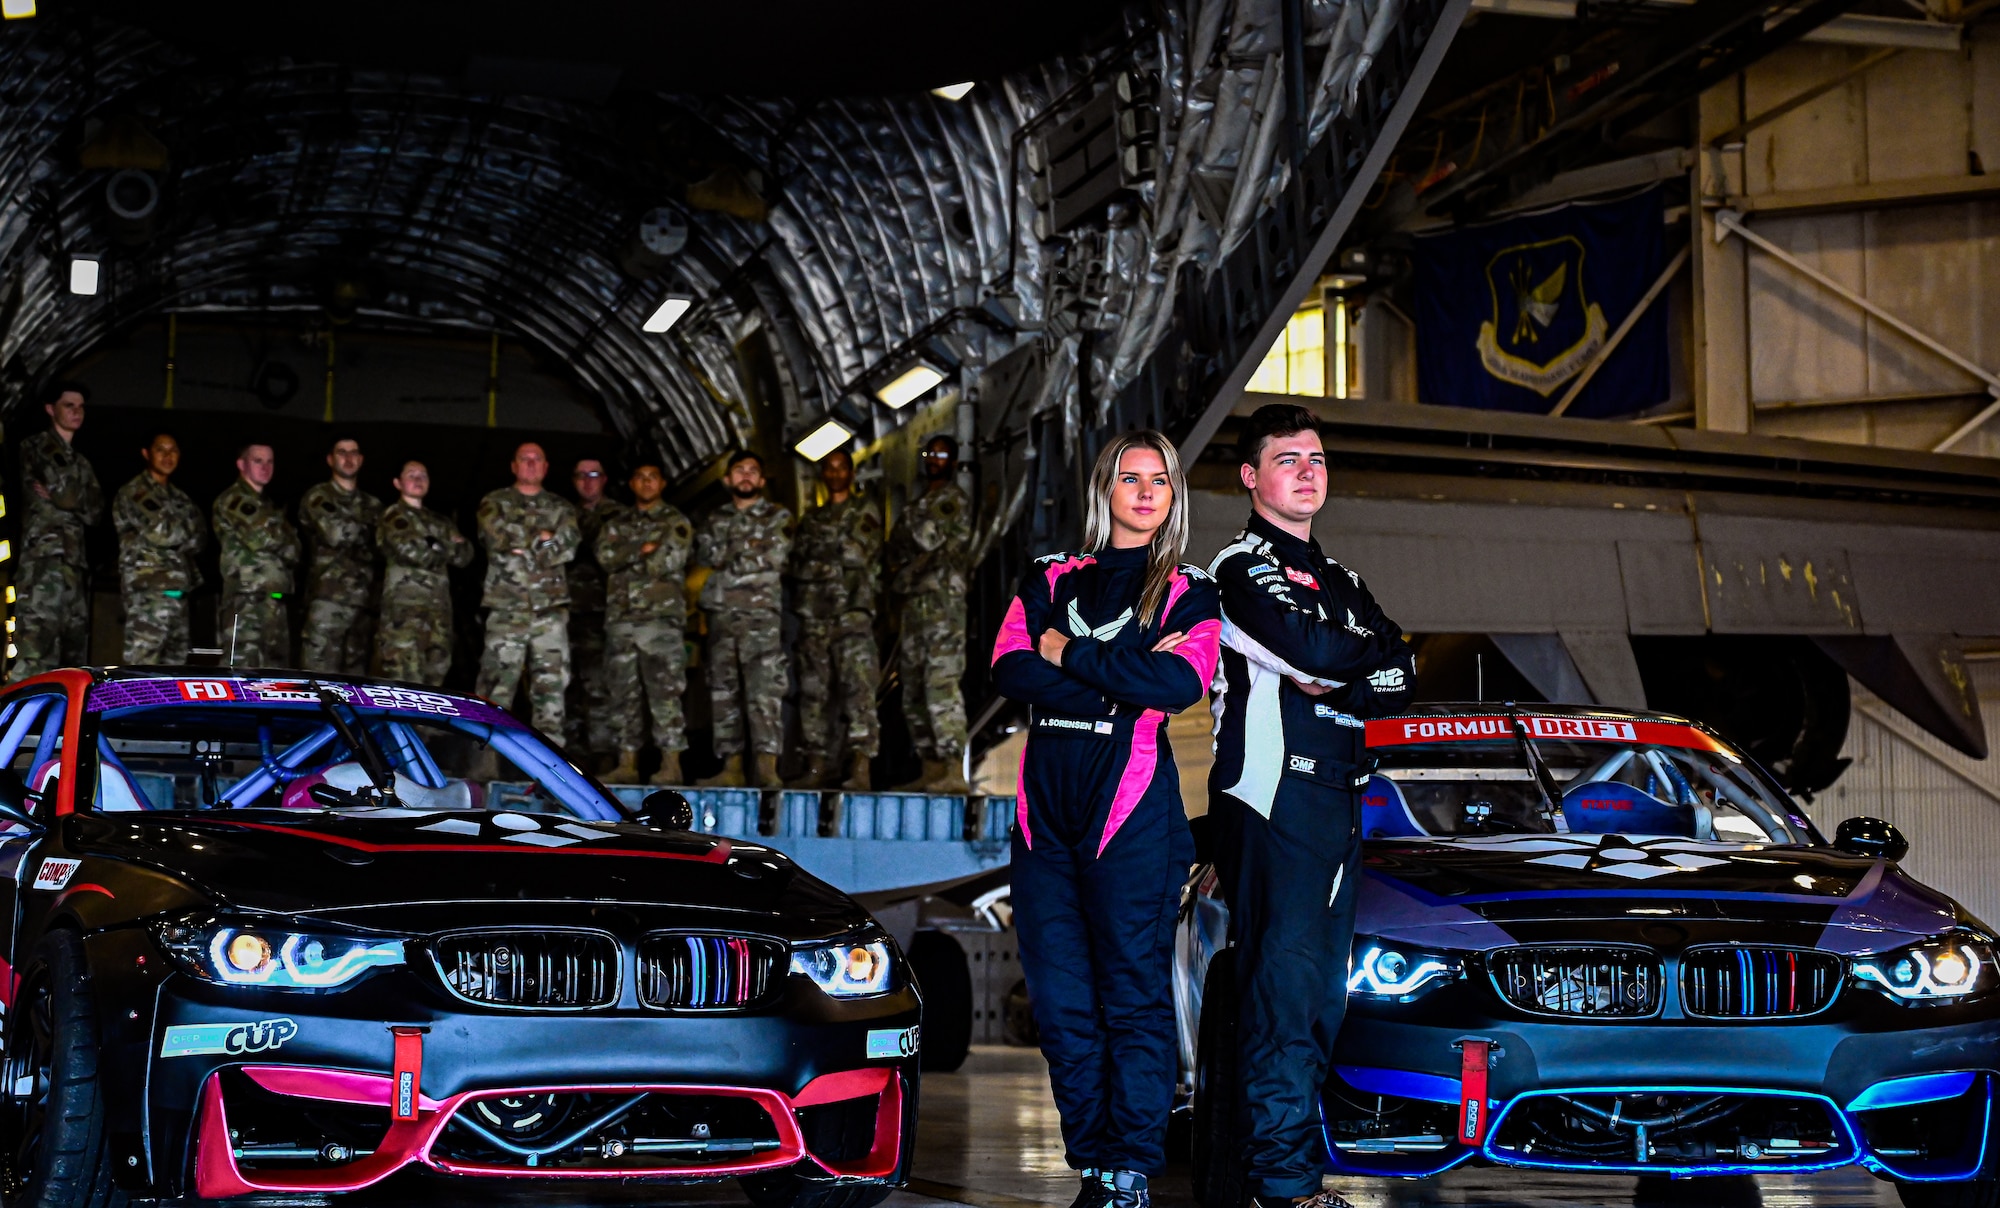 Formula Drift drivers Branden and Amanda Sorenson pose with Airmen from the 305th Air Mobility Wing at Joint Base McGuire-Dix-Lakehurst on June 7, 2022. Drift team duo Branden and Amanda Sorensen visited JB MDL to interact with Airmen and learn about different Air Force career fields. Air Force Recruiting Service recently continued their 13-year partnership with the Formula Drift series. Throughout the 2022 Formula Drift circuit, the Air Force will serve as the primary sponsor for the Sorensen Motorsports team.